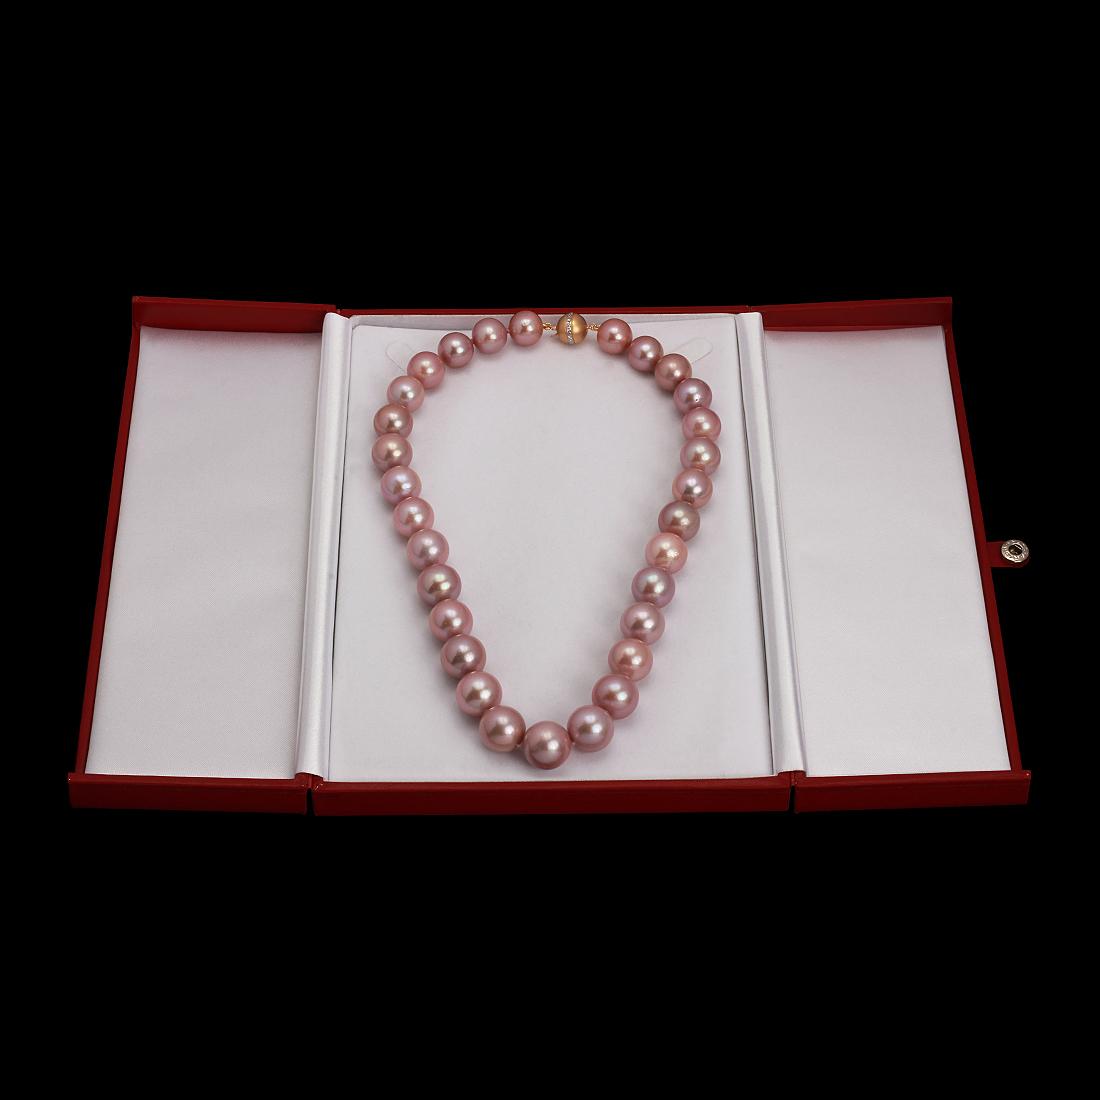 13-15mm South Sea Cultured Pearl Necklace